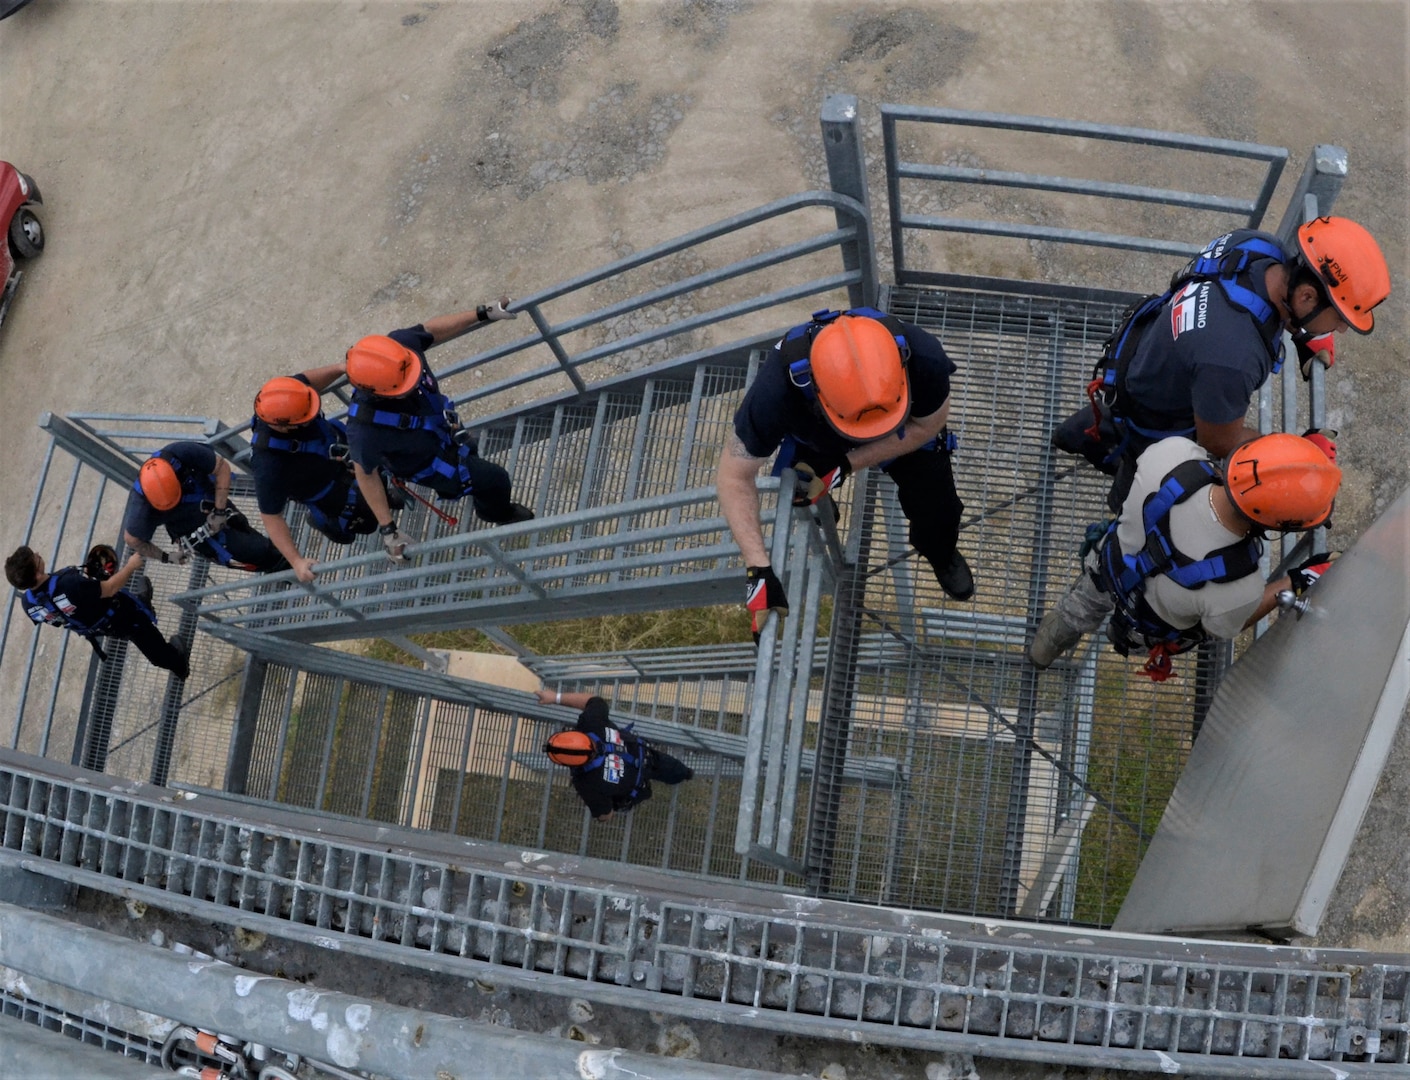 Joint Base San Antonio Fire Emergency Services hosted a Rescue One course at JBSA-Randolph from Oct. 22 to Nov. 15.